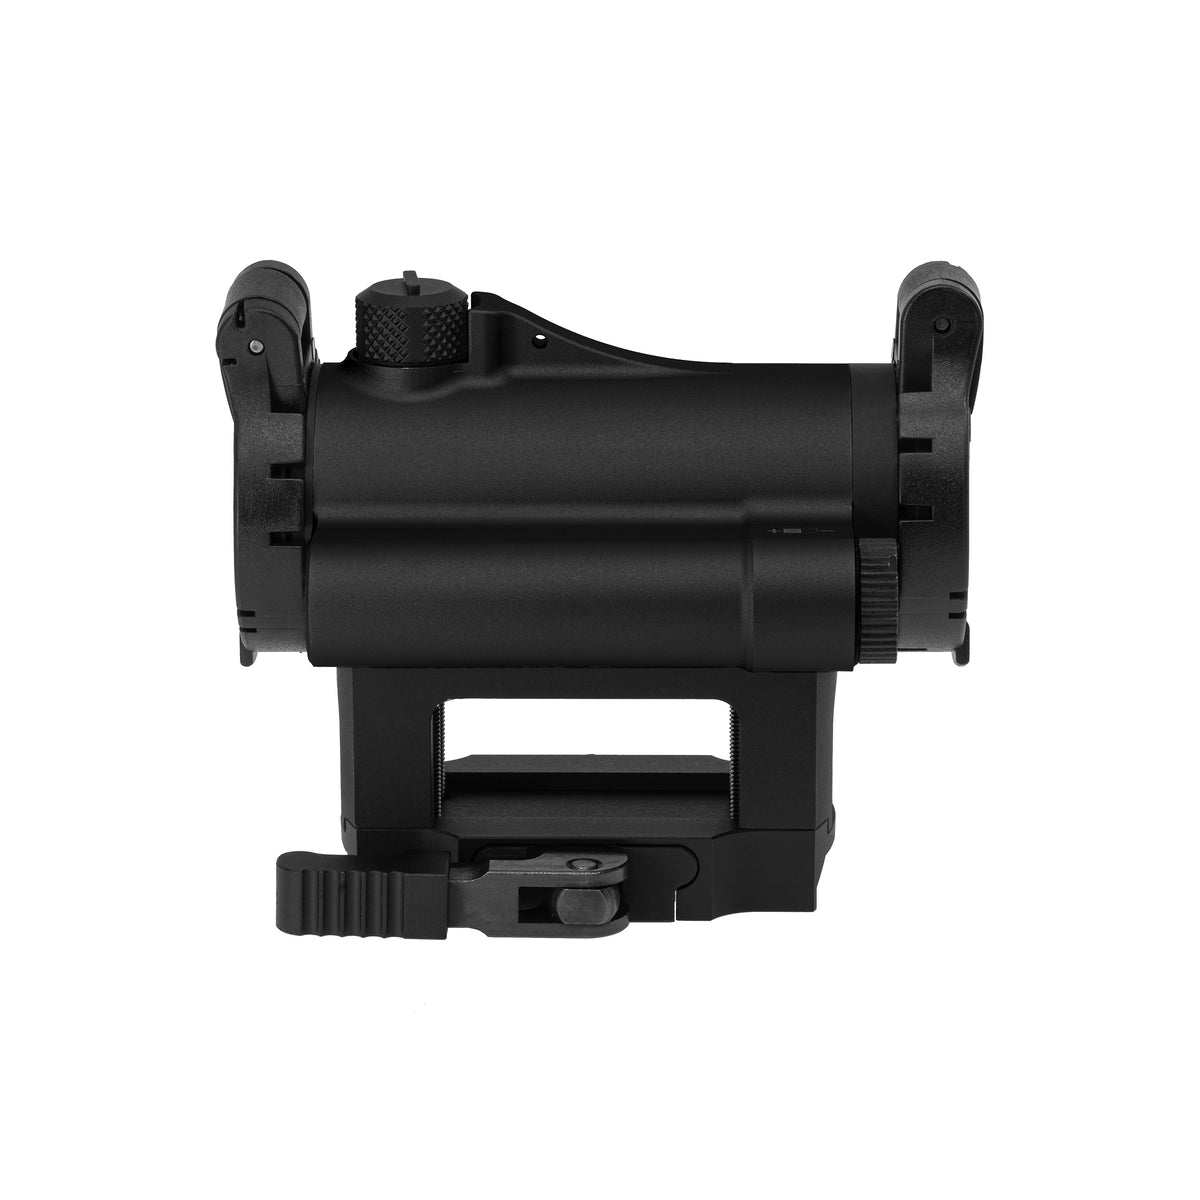 ZV-1 Red Dot Sight w/Low Mount and Riser